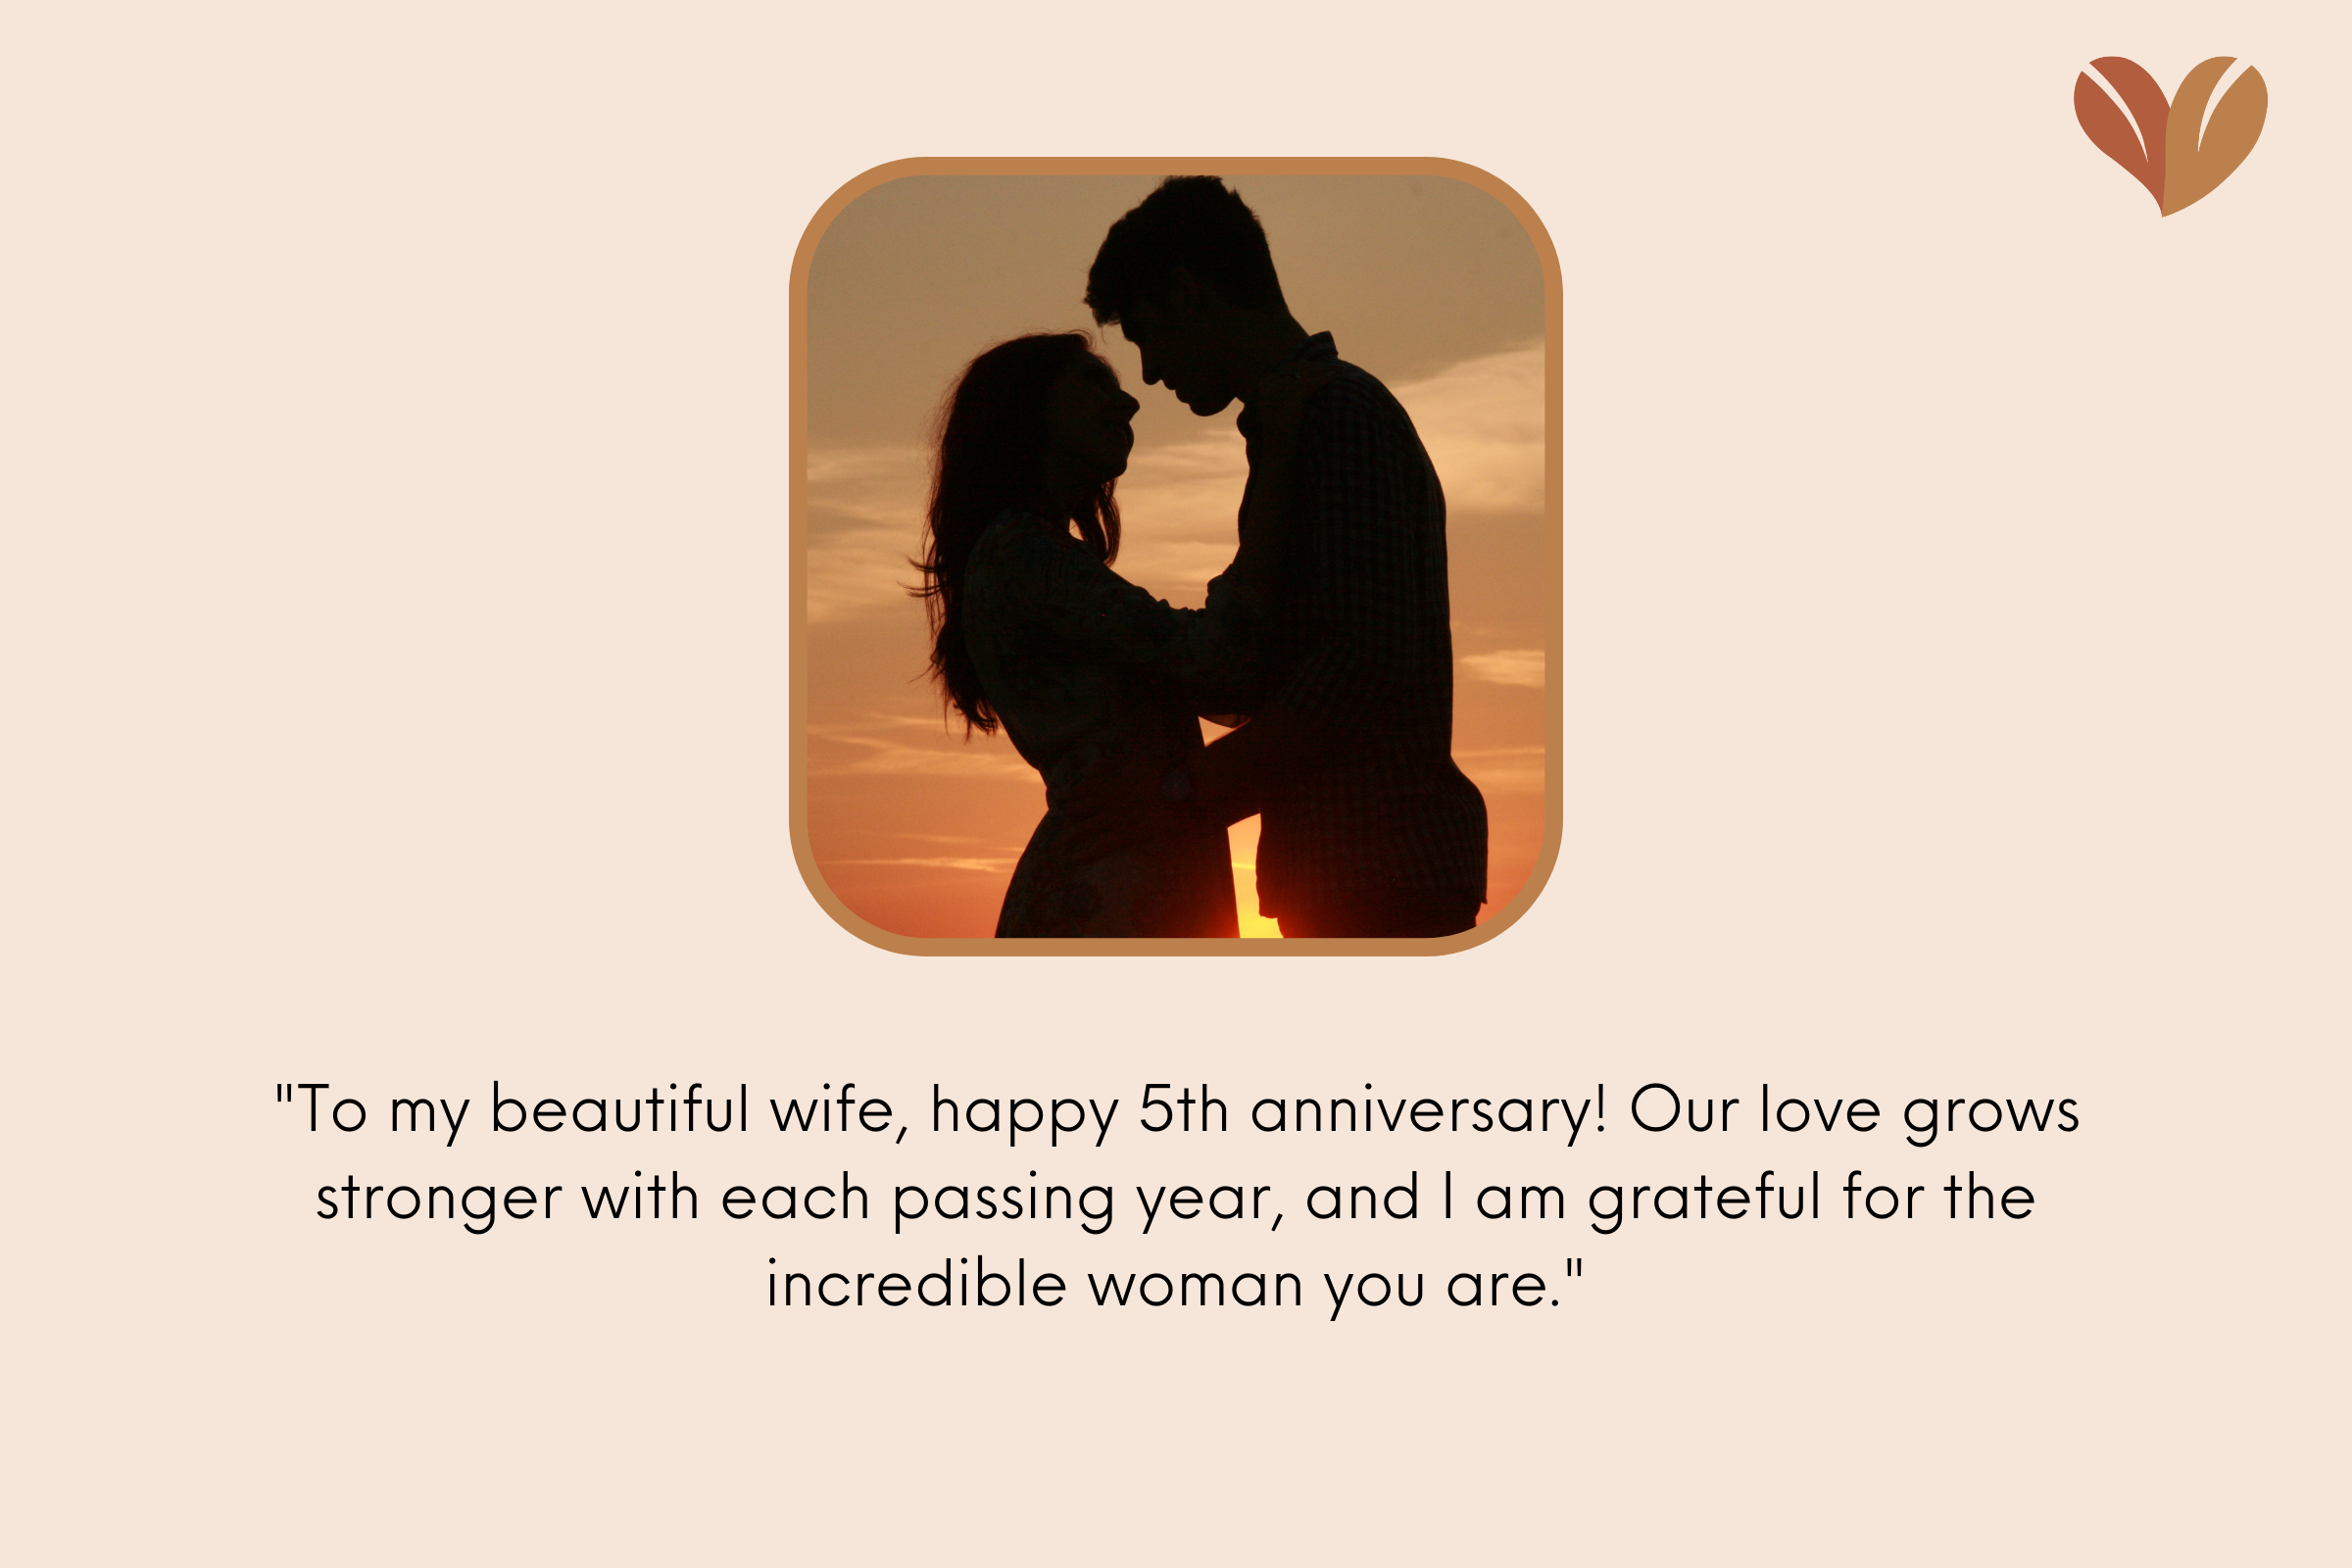 Wishes to say on anniversaries